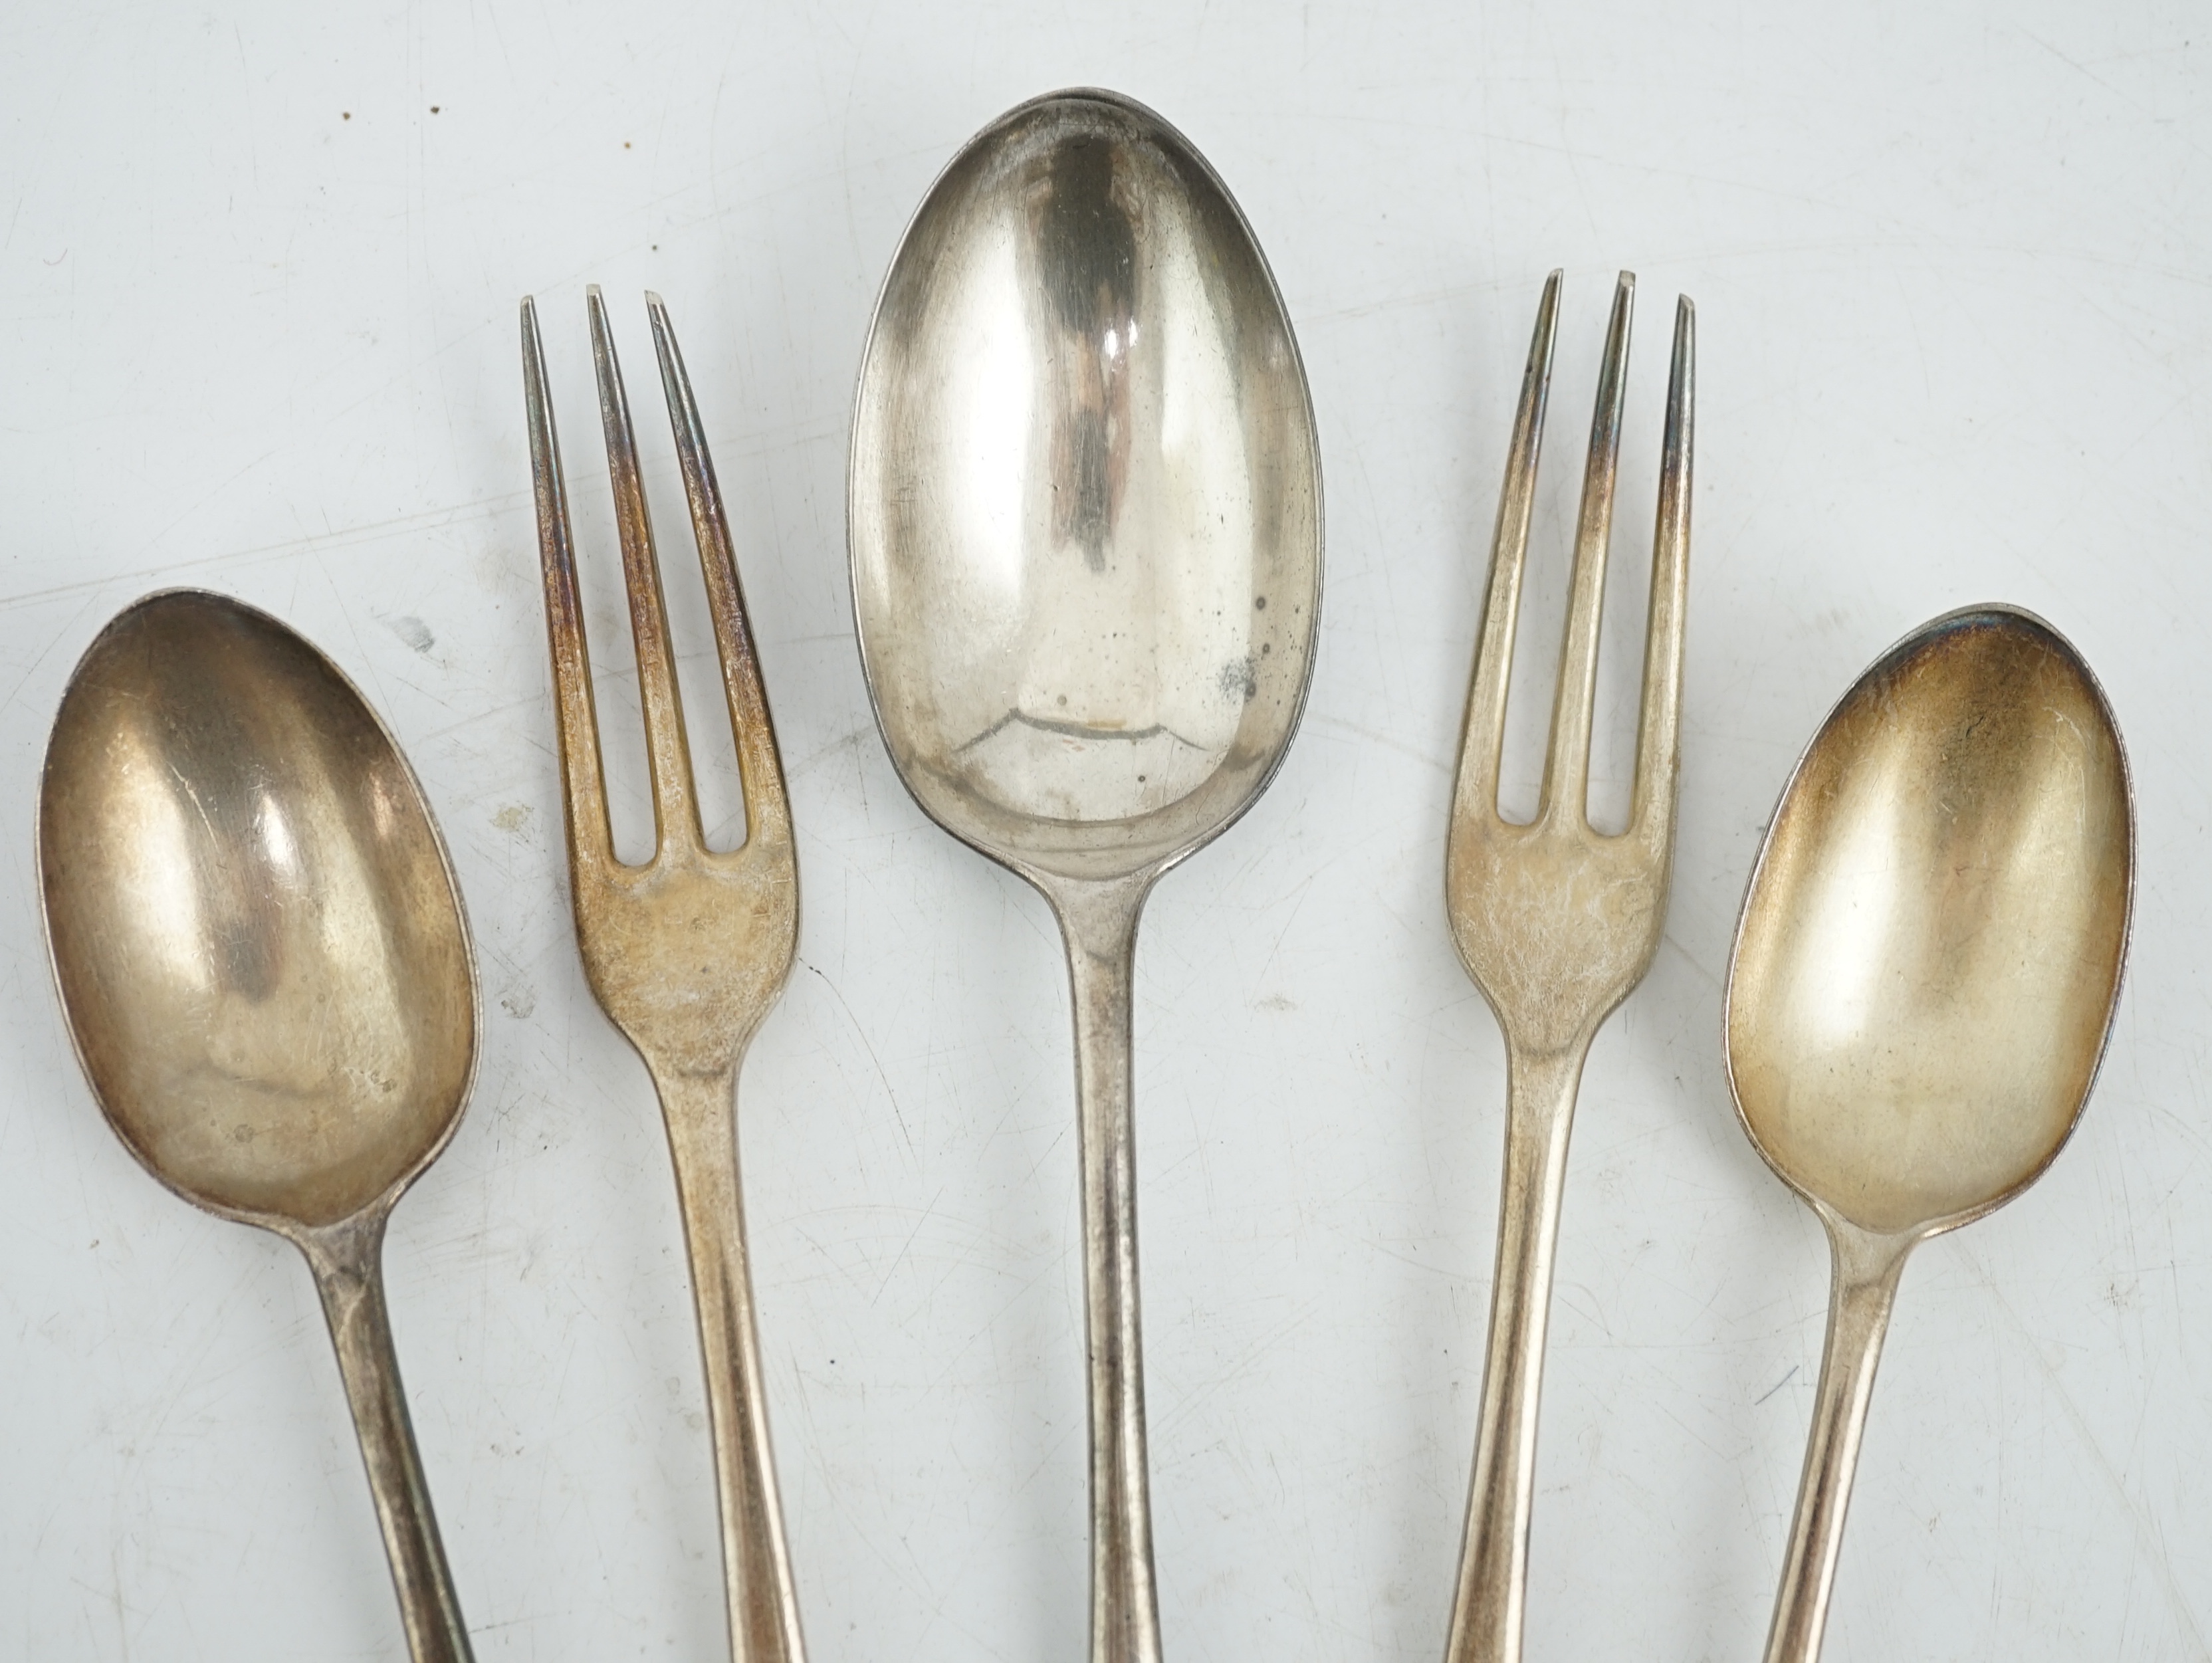 Sundry silver, consisting of three pieces of George III flatware, two 800 standard coffee spoons, a pair of candlesticks(a.f.), a lidded glass preserve pot, clothes brush, two pepperettes and a desk seal.